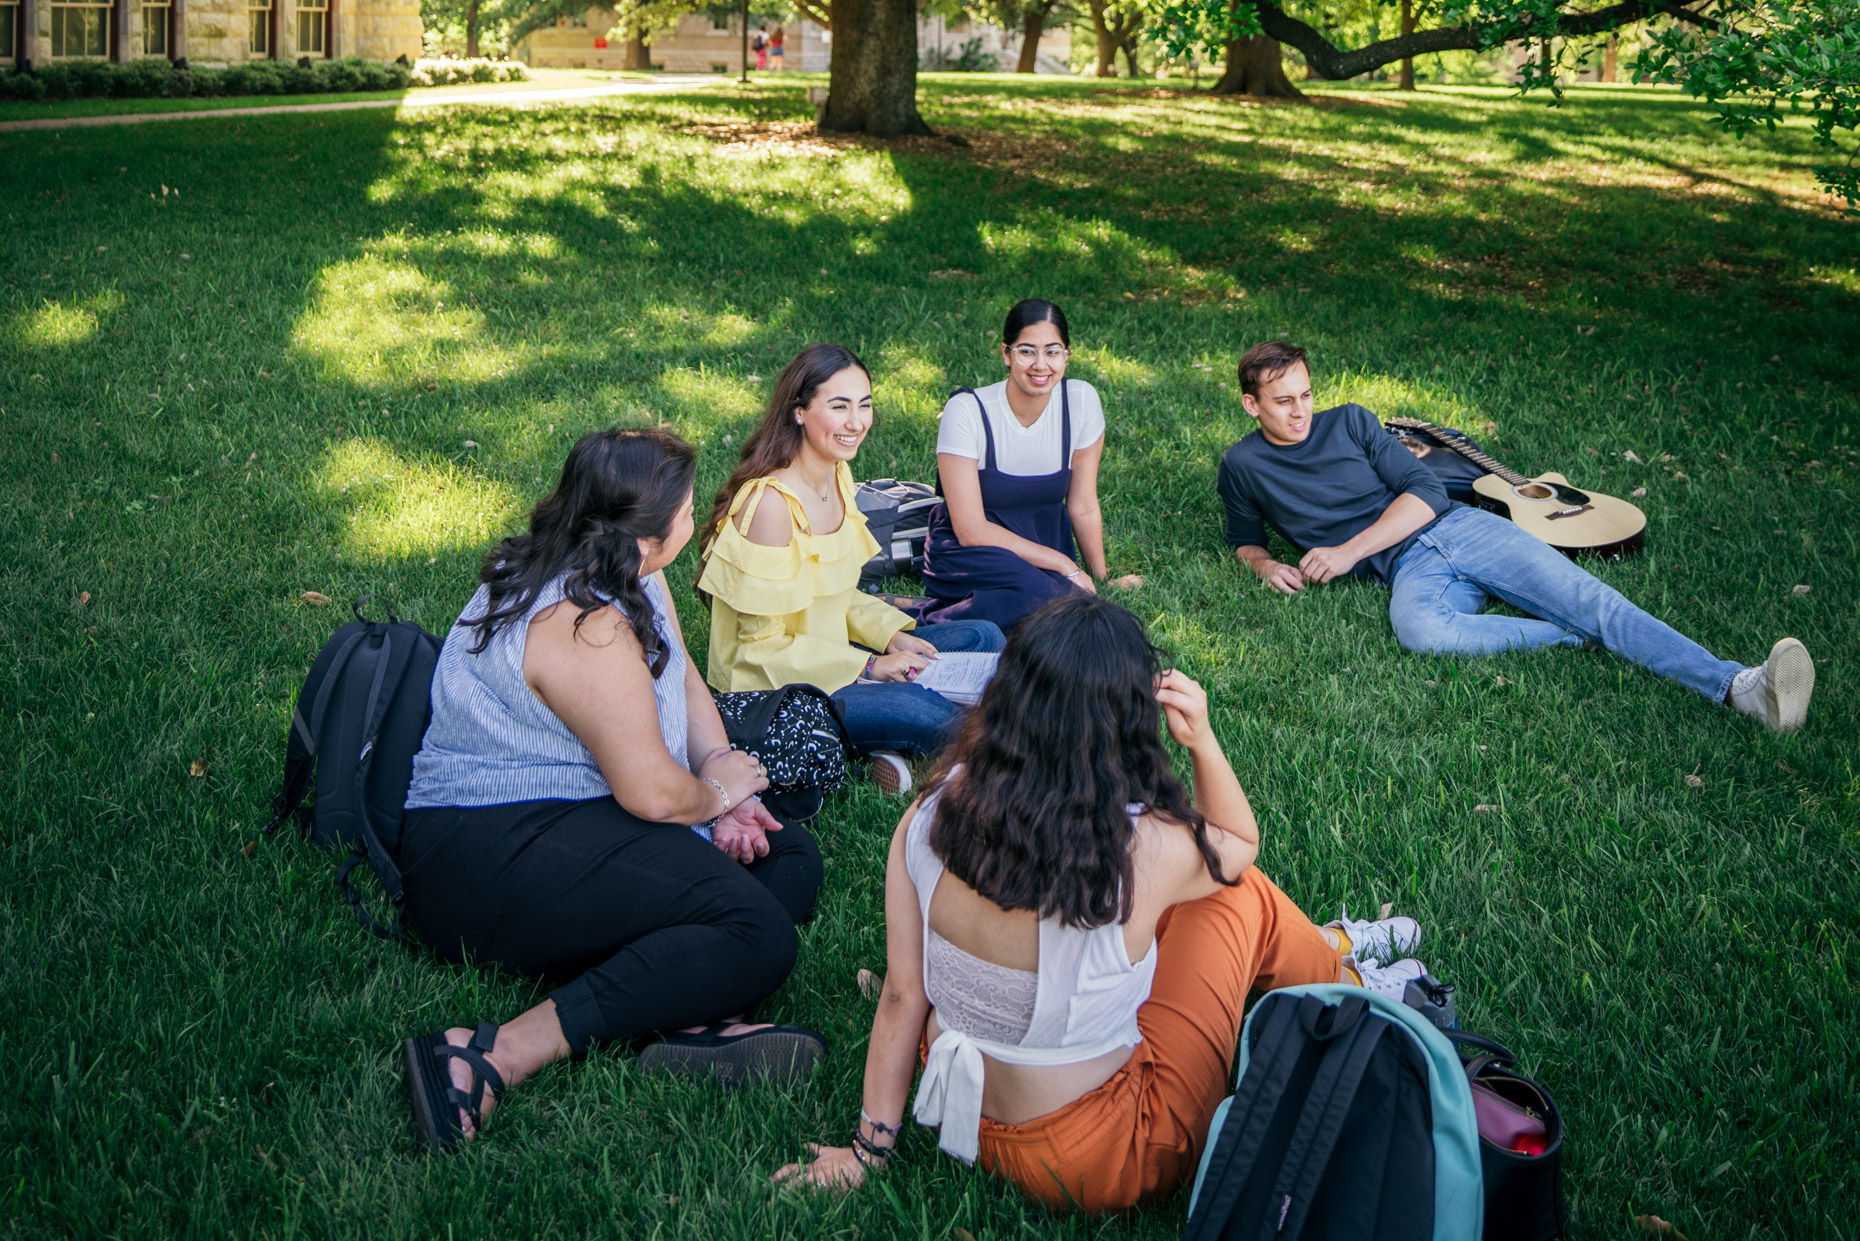 Group of happy college students hanging out on campus lawn